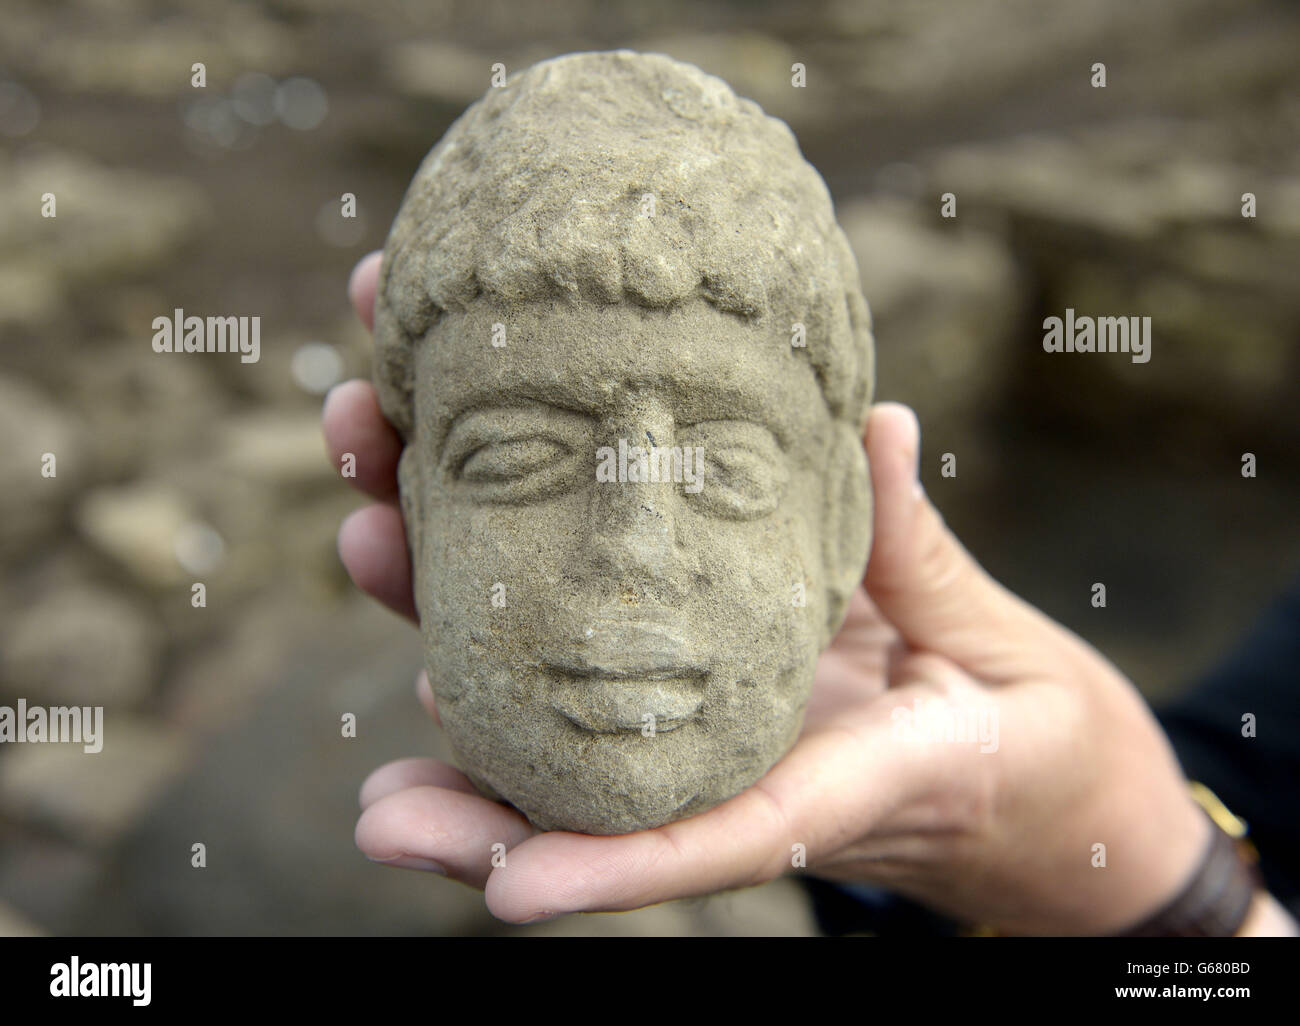 The 1,800-year-old carved stone head of a possible Geordie Roman god that was found by archeologists from Durham University at Binchester Roman Fort, near Bishop Auckland in County Durham. Stock Photo